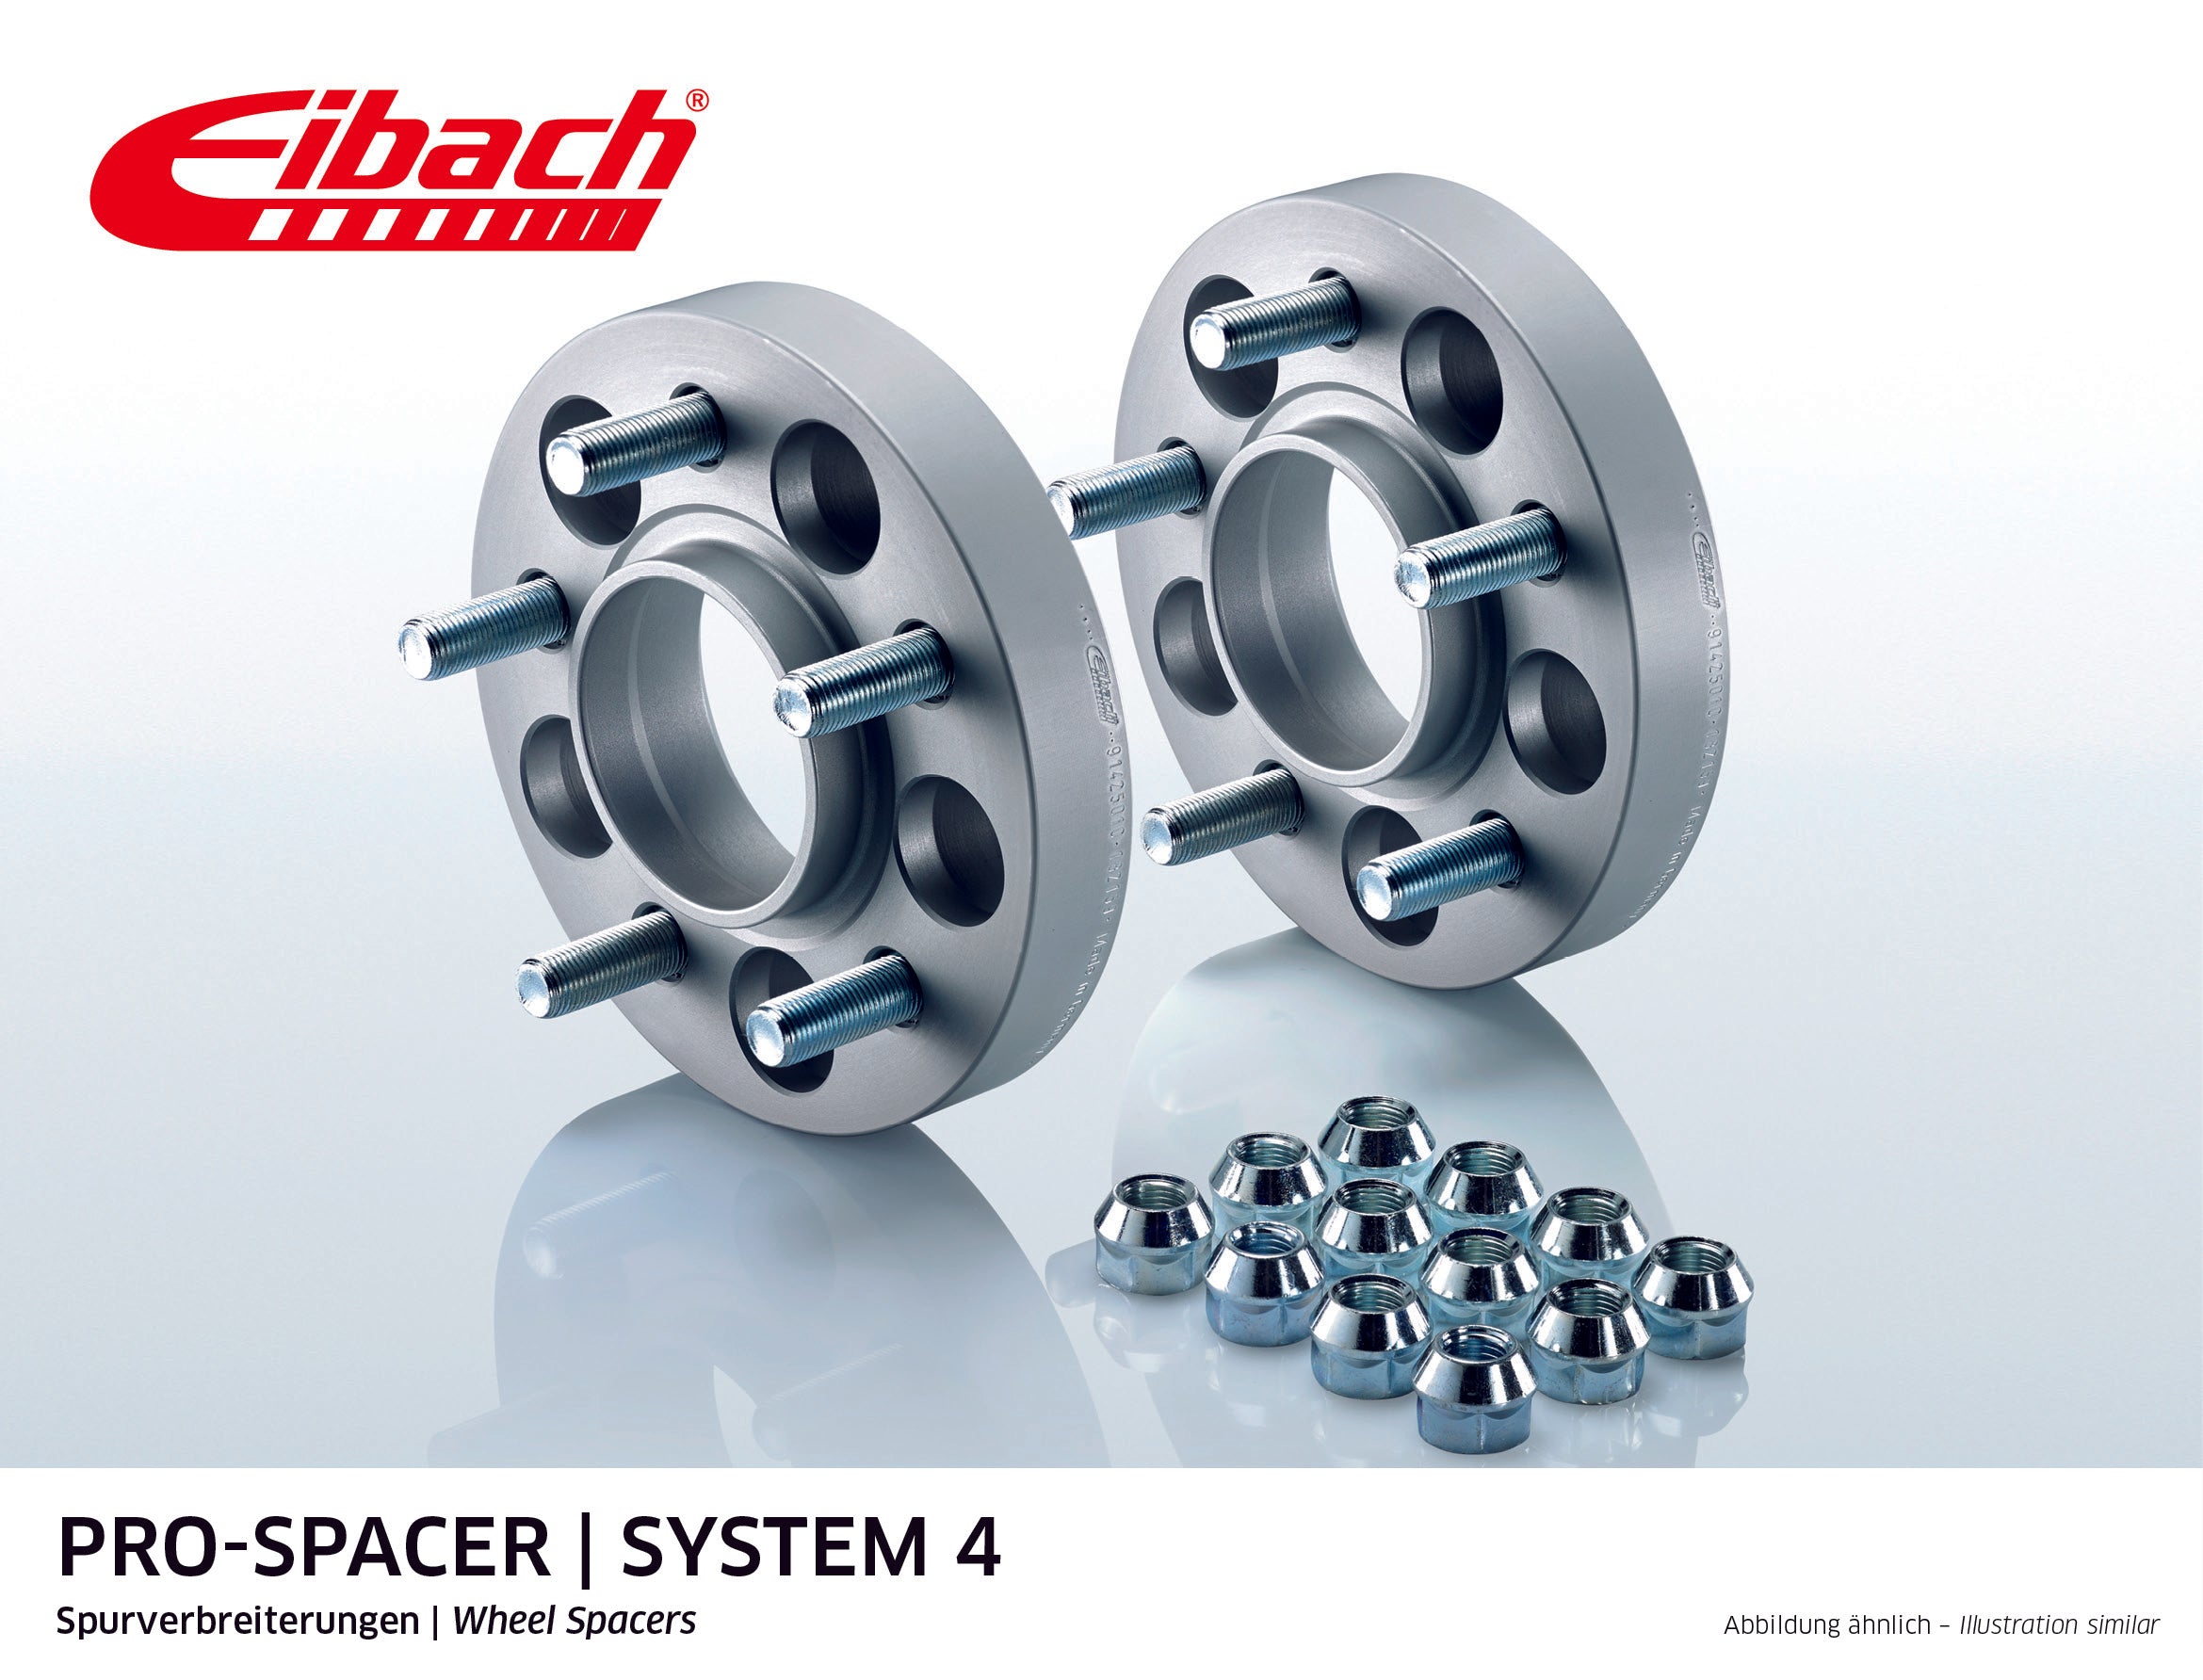 Eibach Pro-Spacer Kit (Pair Of Spacers) 15mm Per Spacer (System 4)  S90-4-15-010 (Silver)